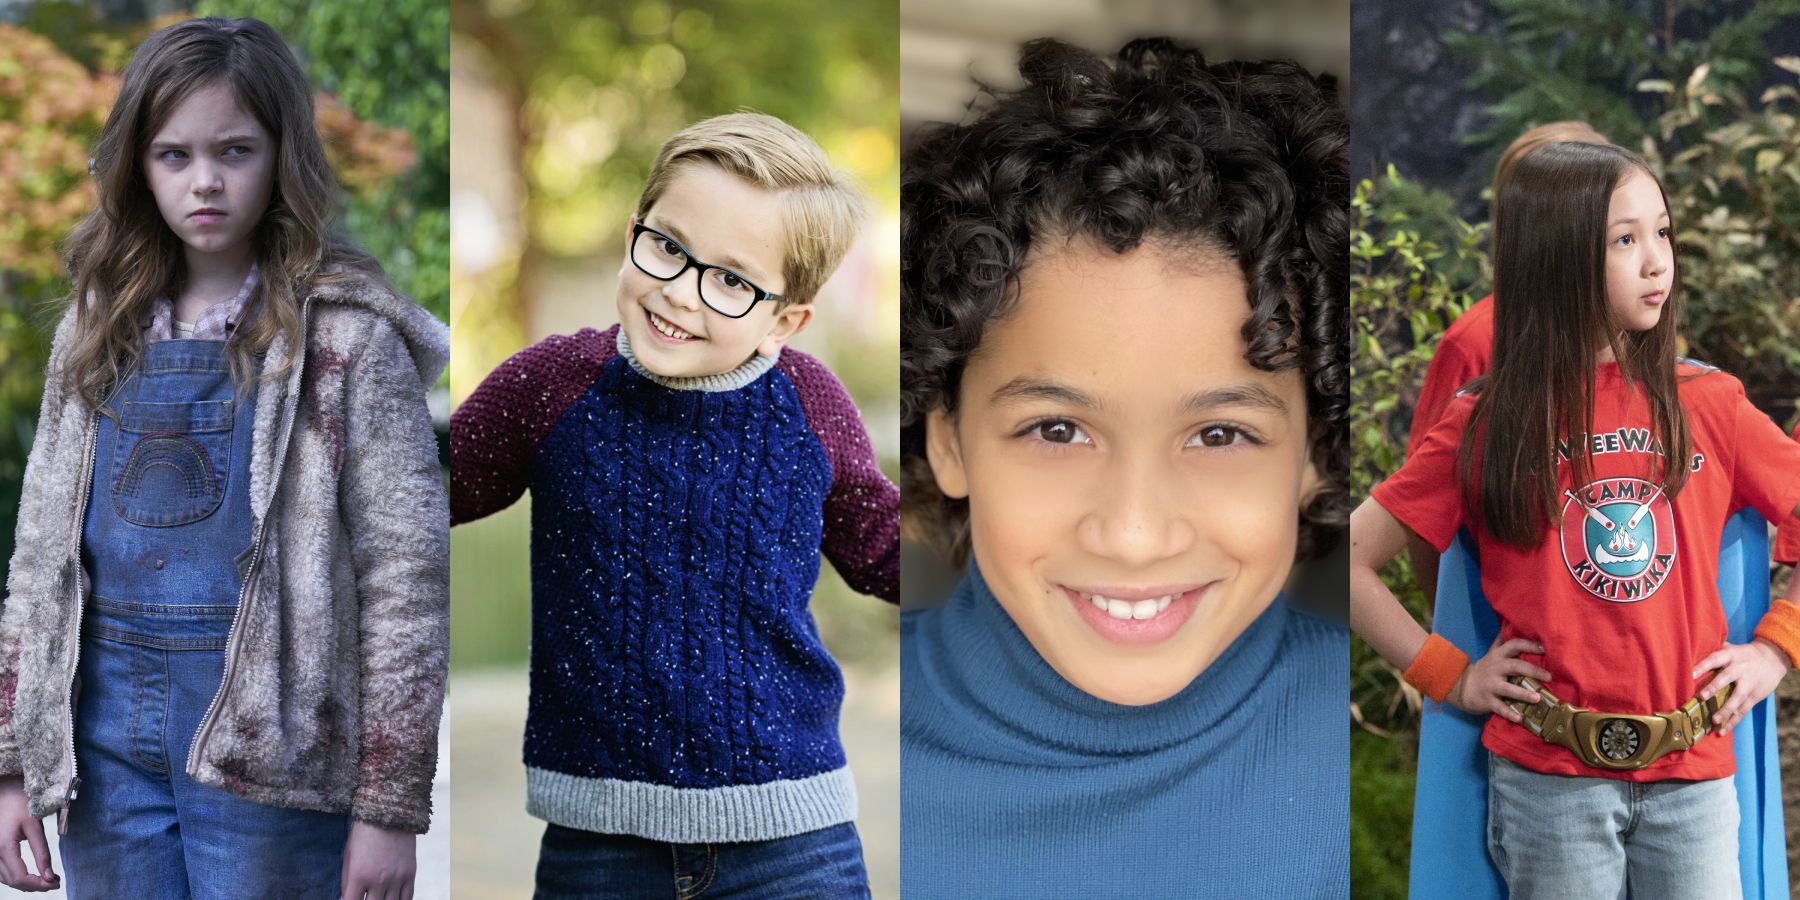 The lead cast of kids in Star Wars: Skeleton Crew, including Ryan Kiera Armstrong, Robert Timothy Smith, Ravi Cabot-Conyers, and Kyriana Kratter